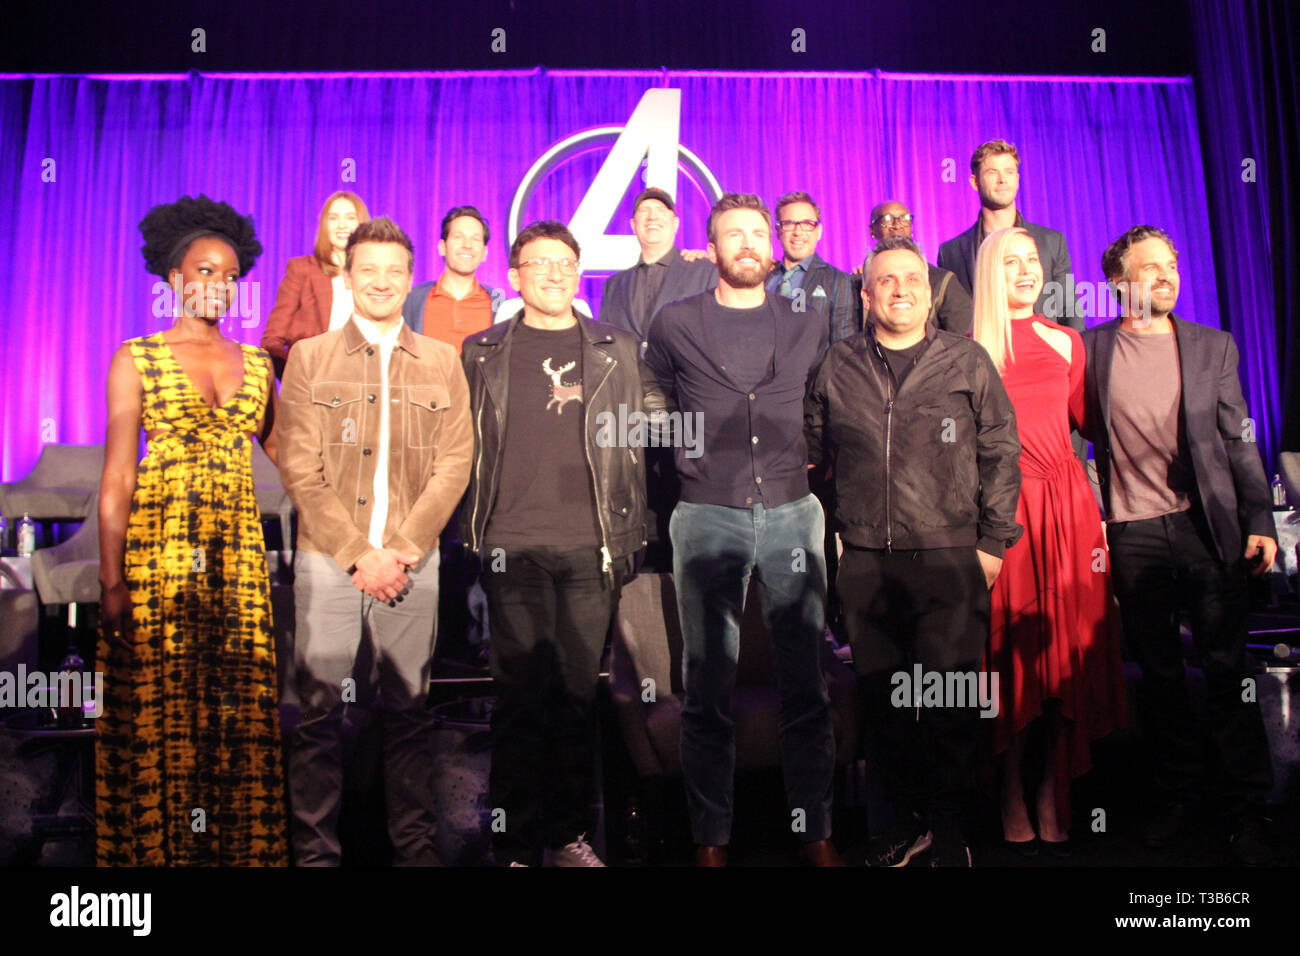 Los Angeles, USA. 7th Apr 2019. Danai Gurira, Karen Gillan, Jeremy Renner, Paul Rudd, Anthony Russo, Kevin Feige, Chris Evans, Robert Downey Jr., Joseph Russo, Don Cheadle, Brie Larson, Chris Hemsworth, Mark Ruffalo 04/07/2018 'Avengers: Endgame' Press Conference held at The InterContinental Los Angeles Downtown in Los Angeles, CA Photo by Izumi Hasegawa/HollywoodNewsWire.co Credit: Hollywood News Wire Inc./Alamy Live News Stock Photo